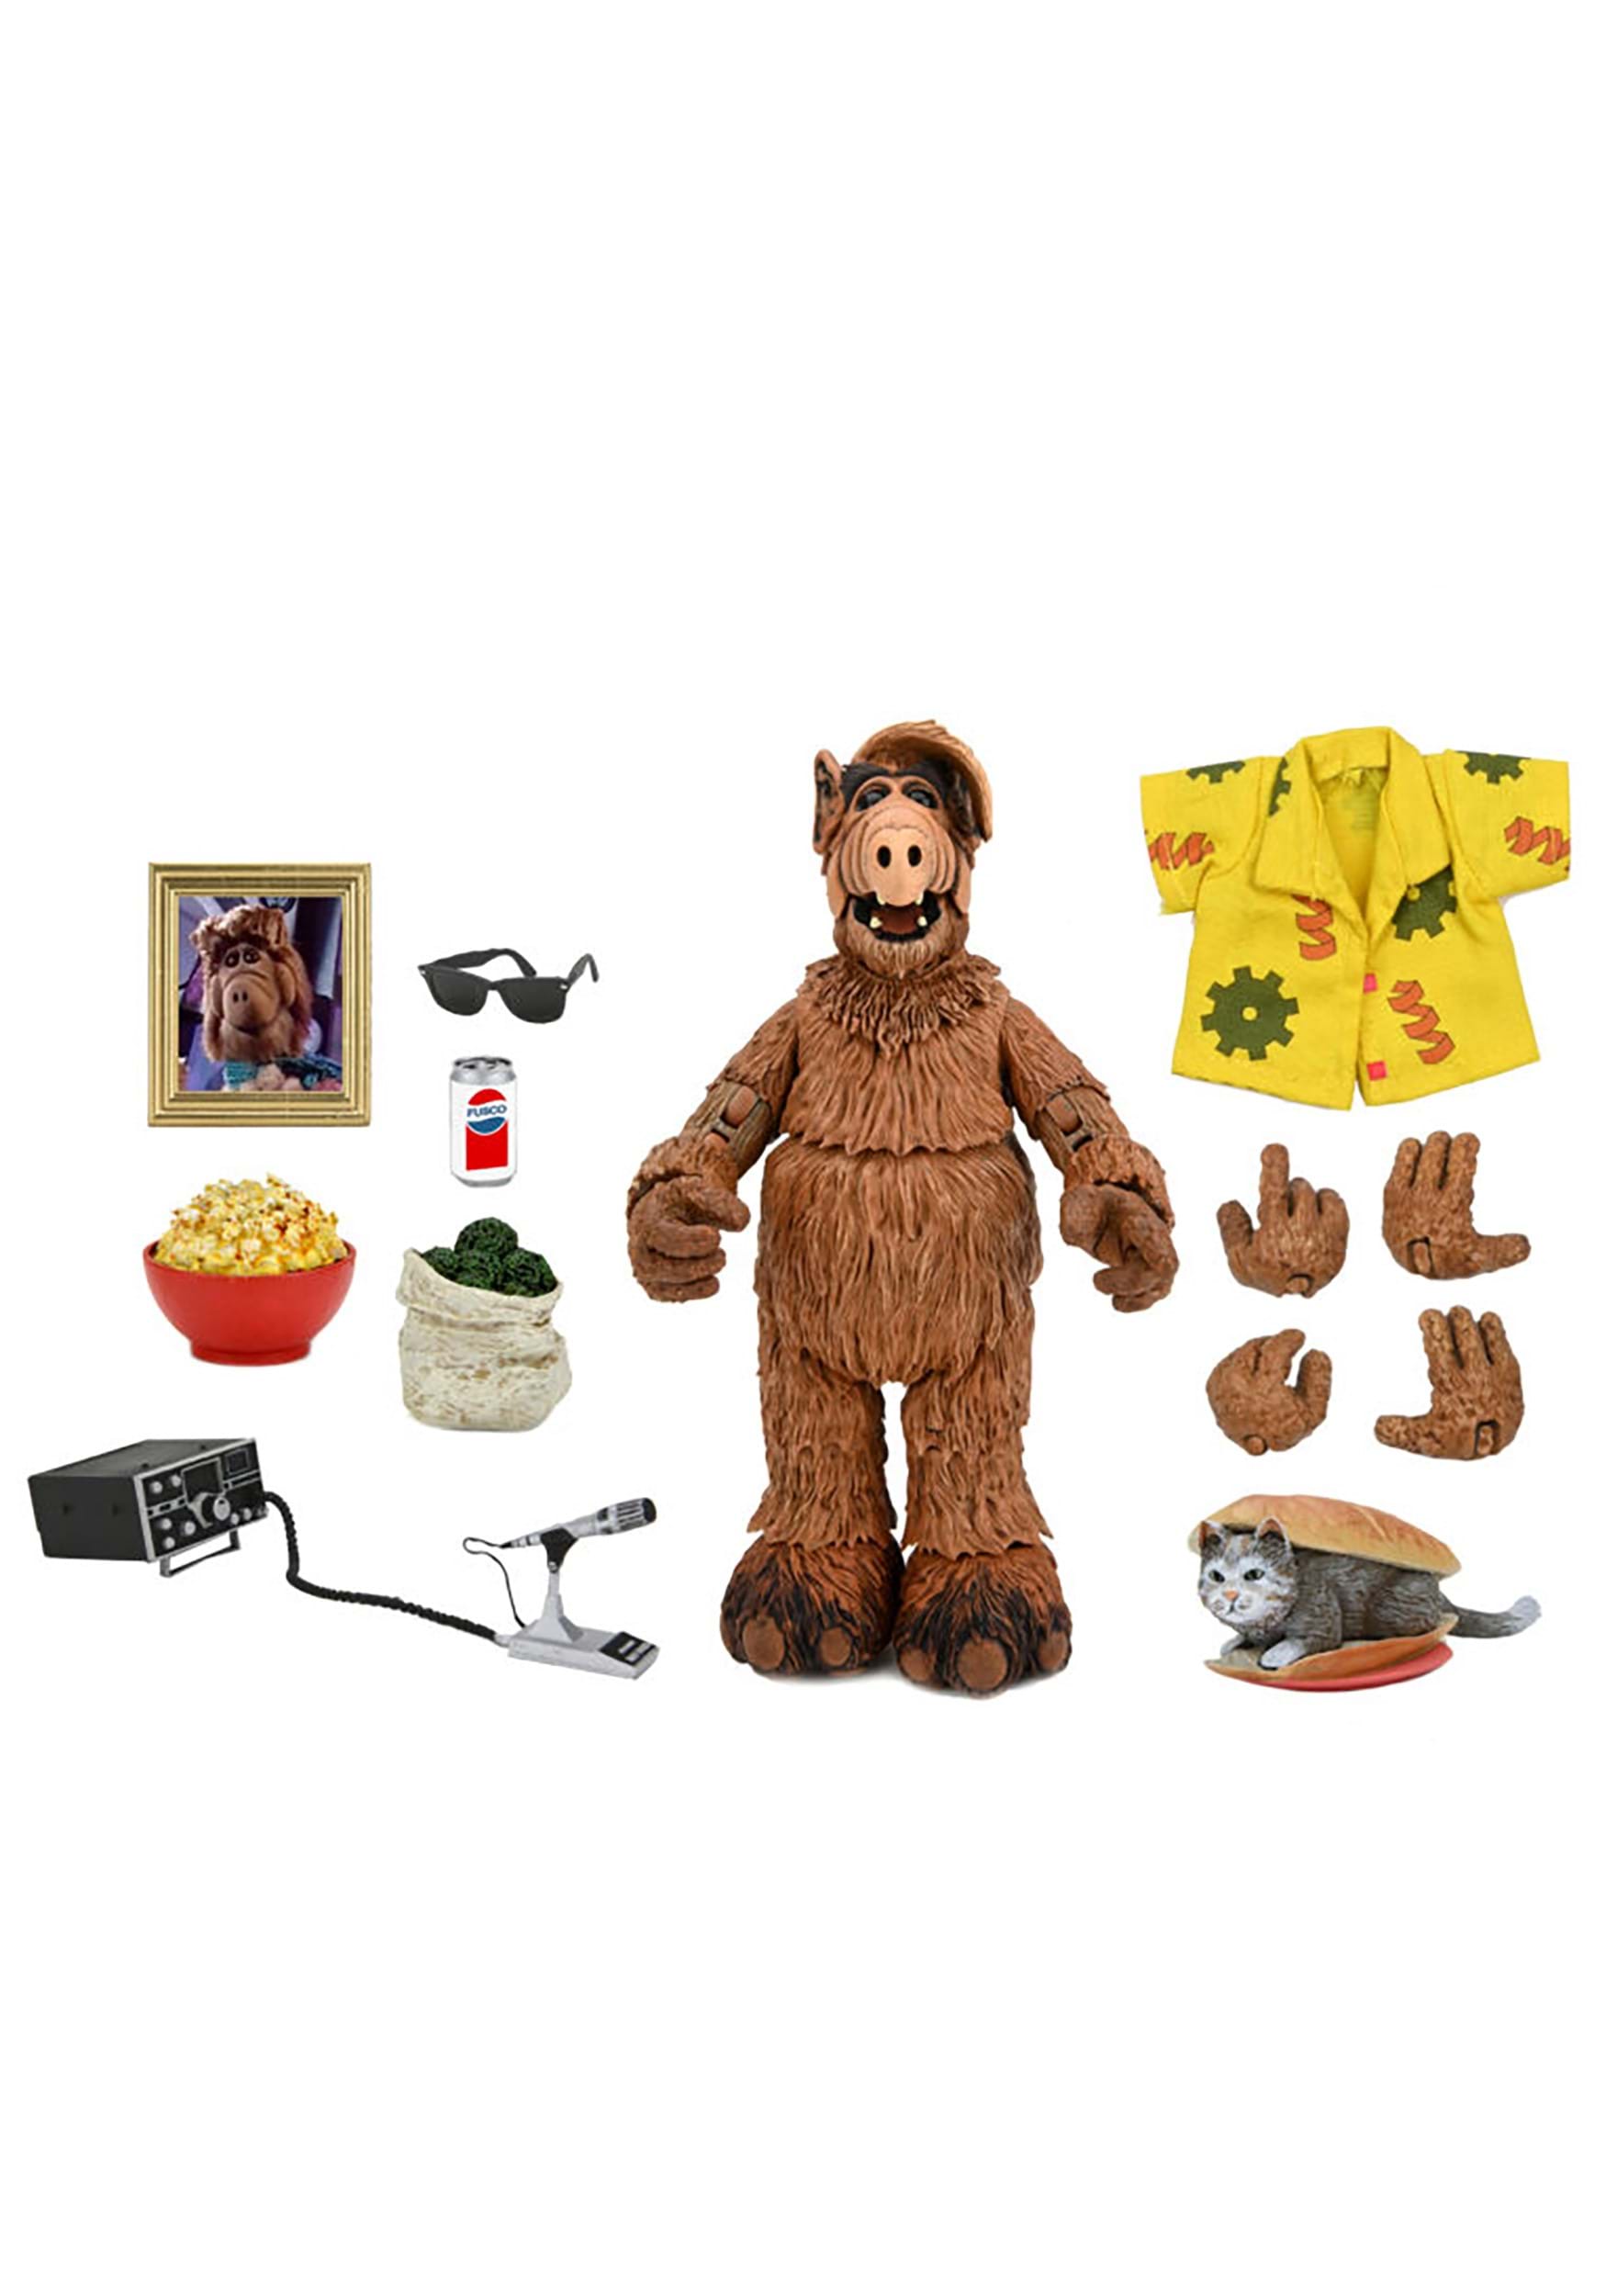 Alf Seven Inch Scale Action Figure | Collectible Action Figures